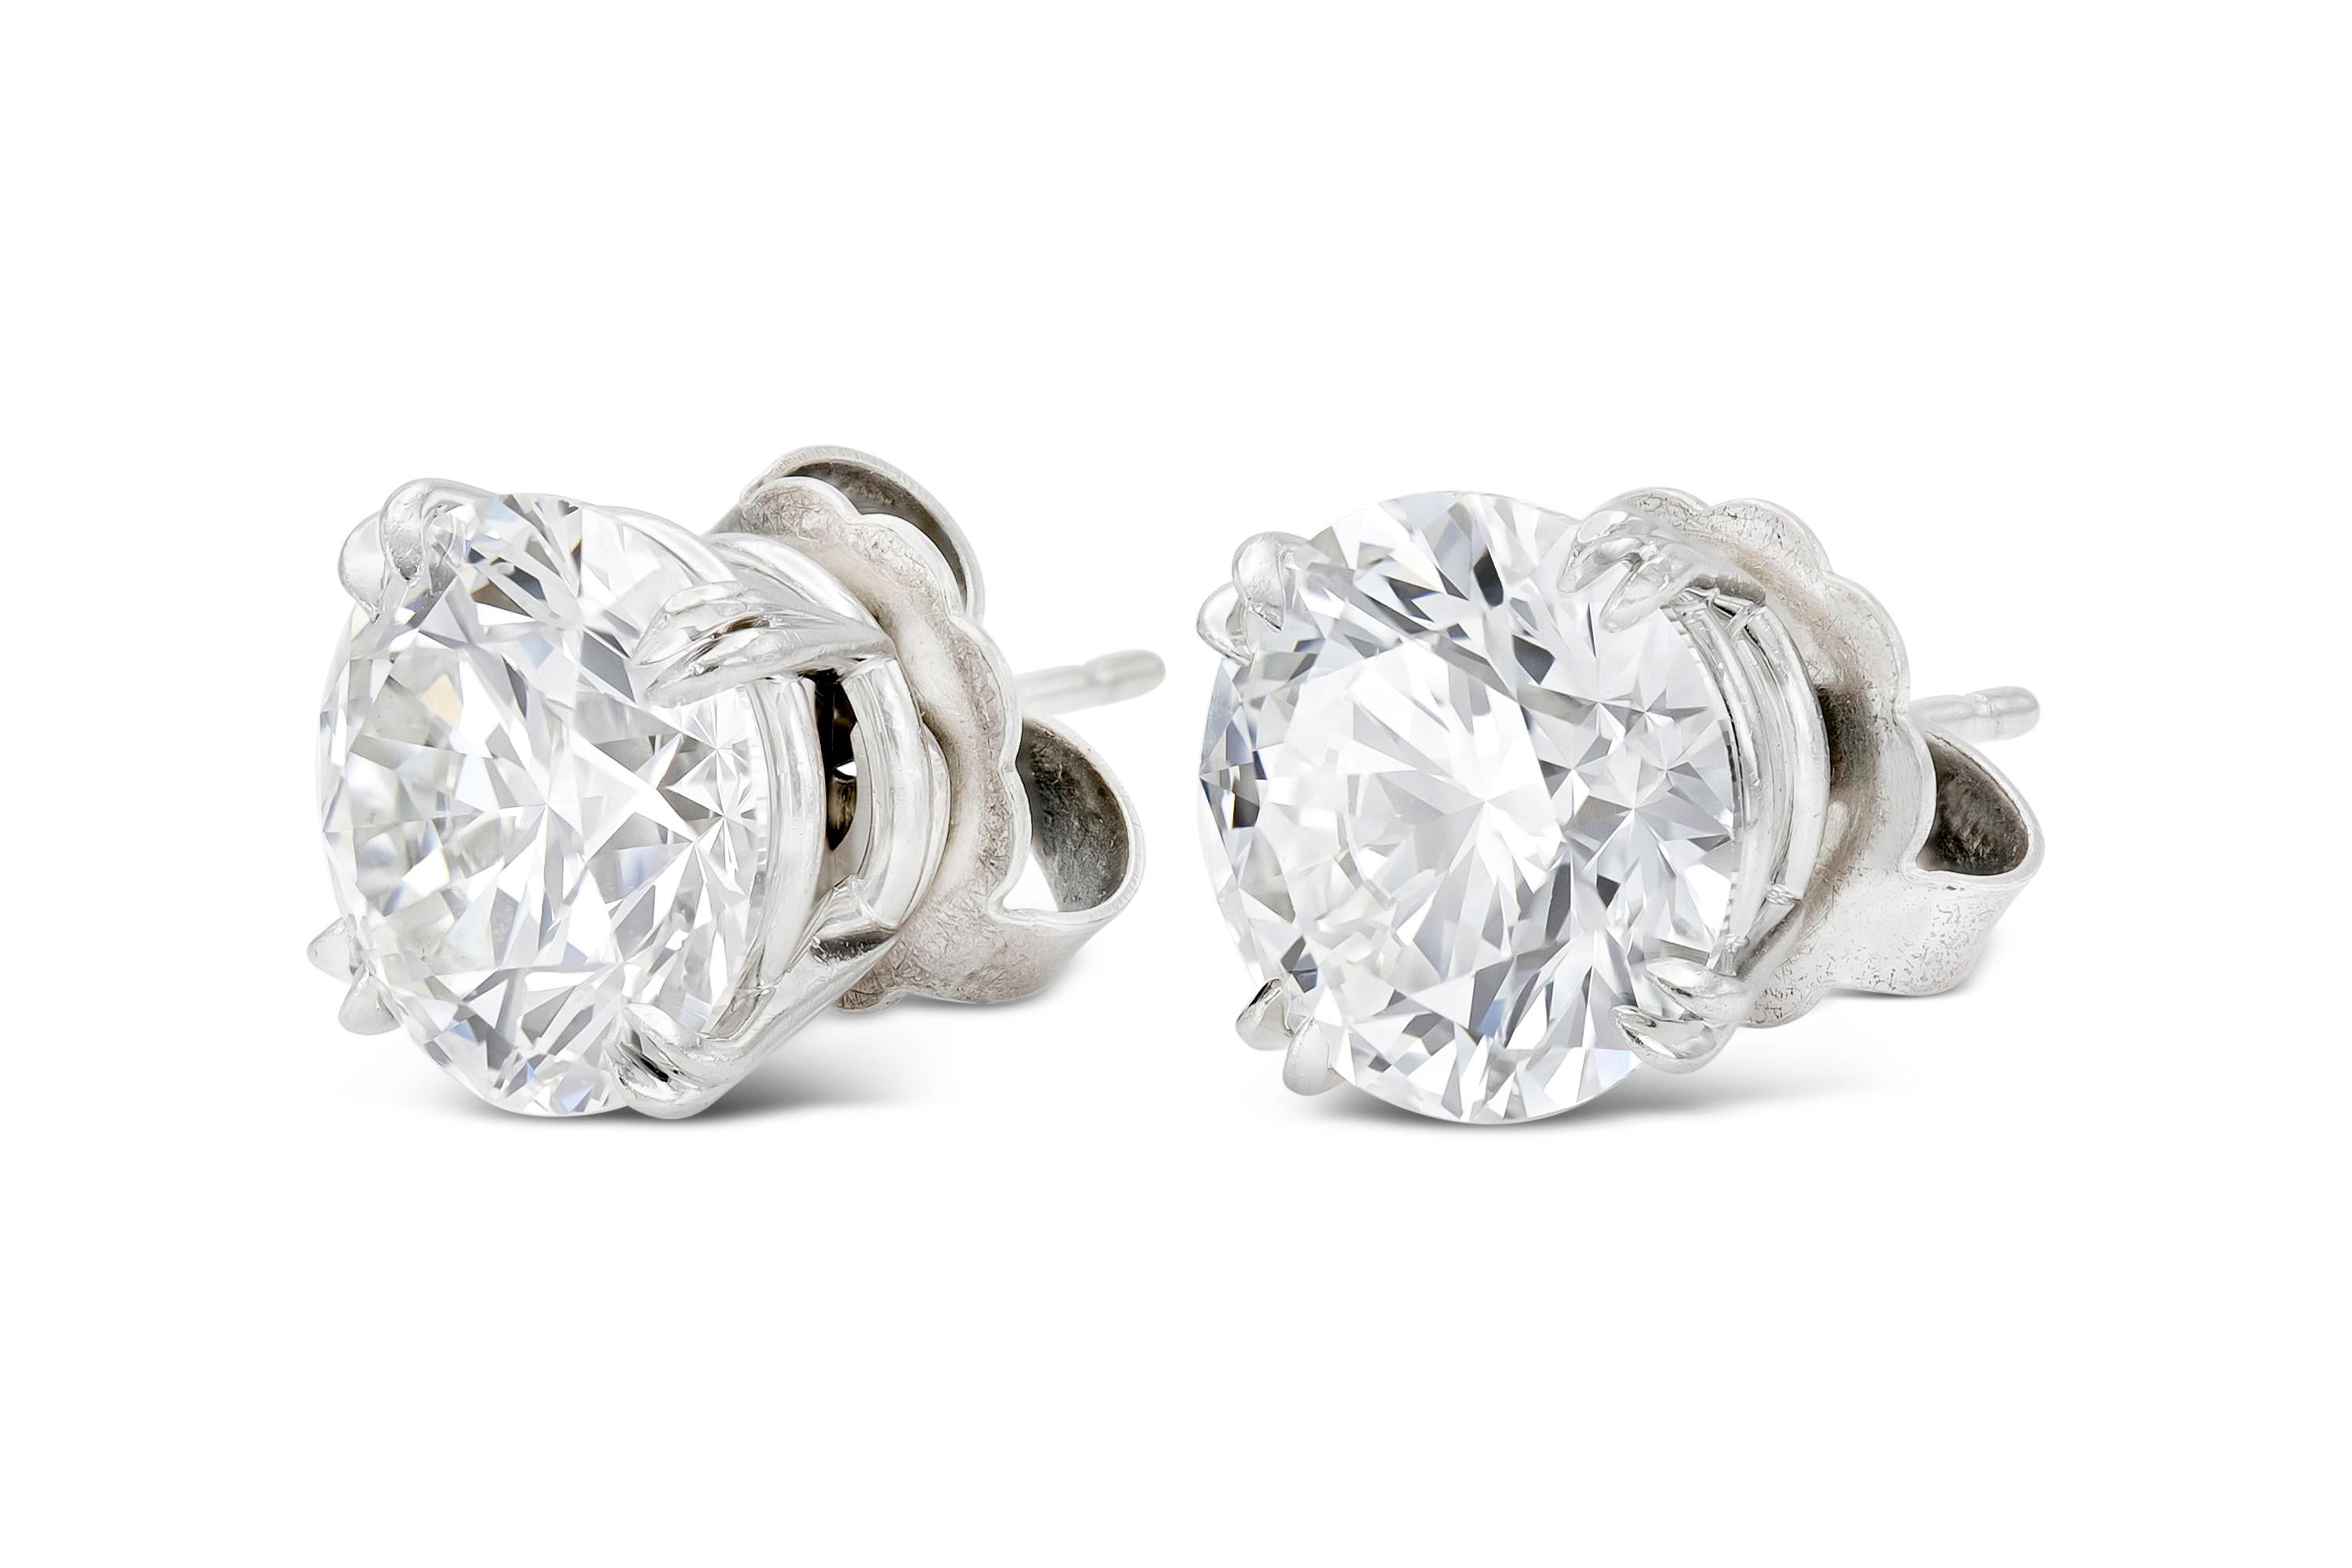 Finely crafted in platinum with two GIA certified Round Brilliant cut diamonds.
One weighs 4.23 carats, E color, VS1 clarity.
GIA #1116844493
The other weighs 4.20 carats, E color, VS1 clarity.
GIA #2121219461
Signed by Harry Winston.
Original